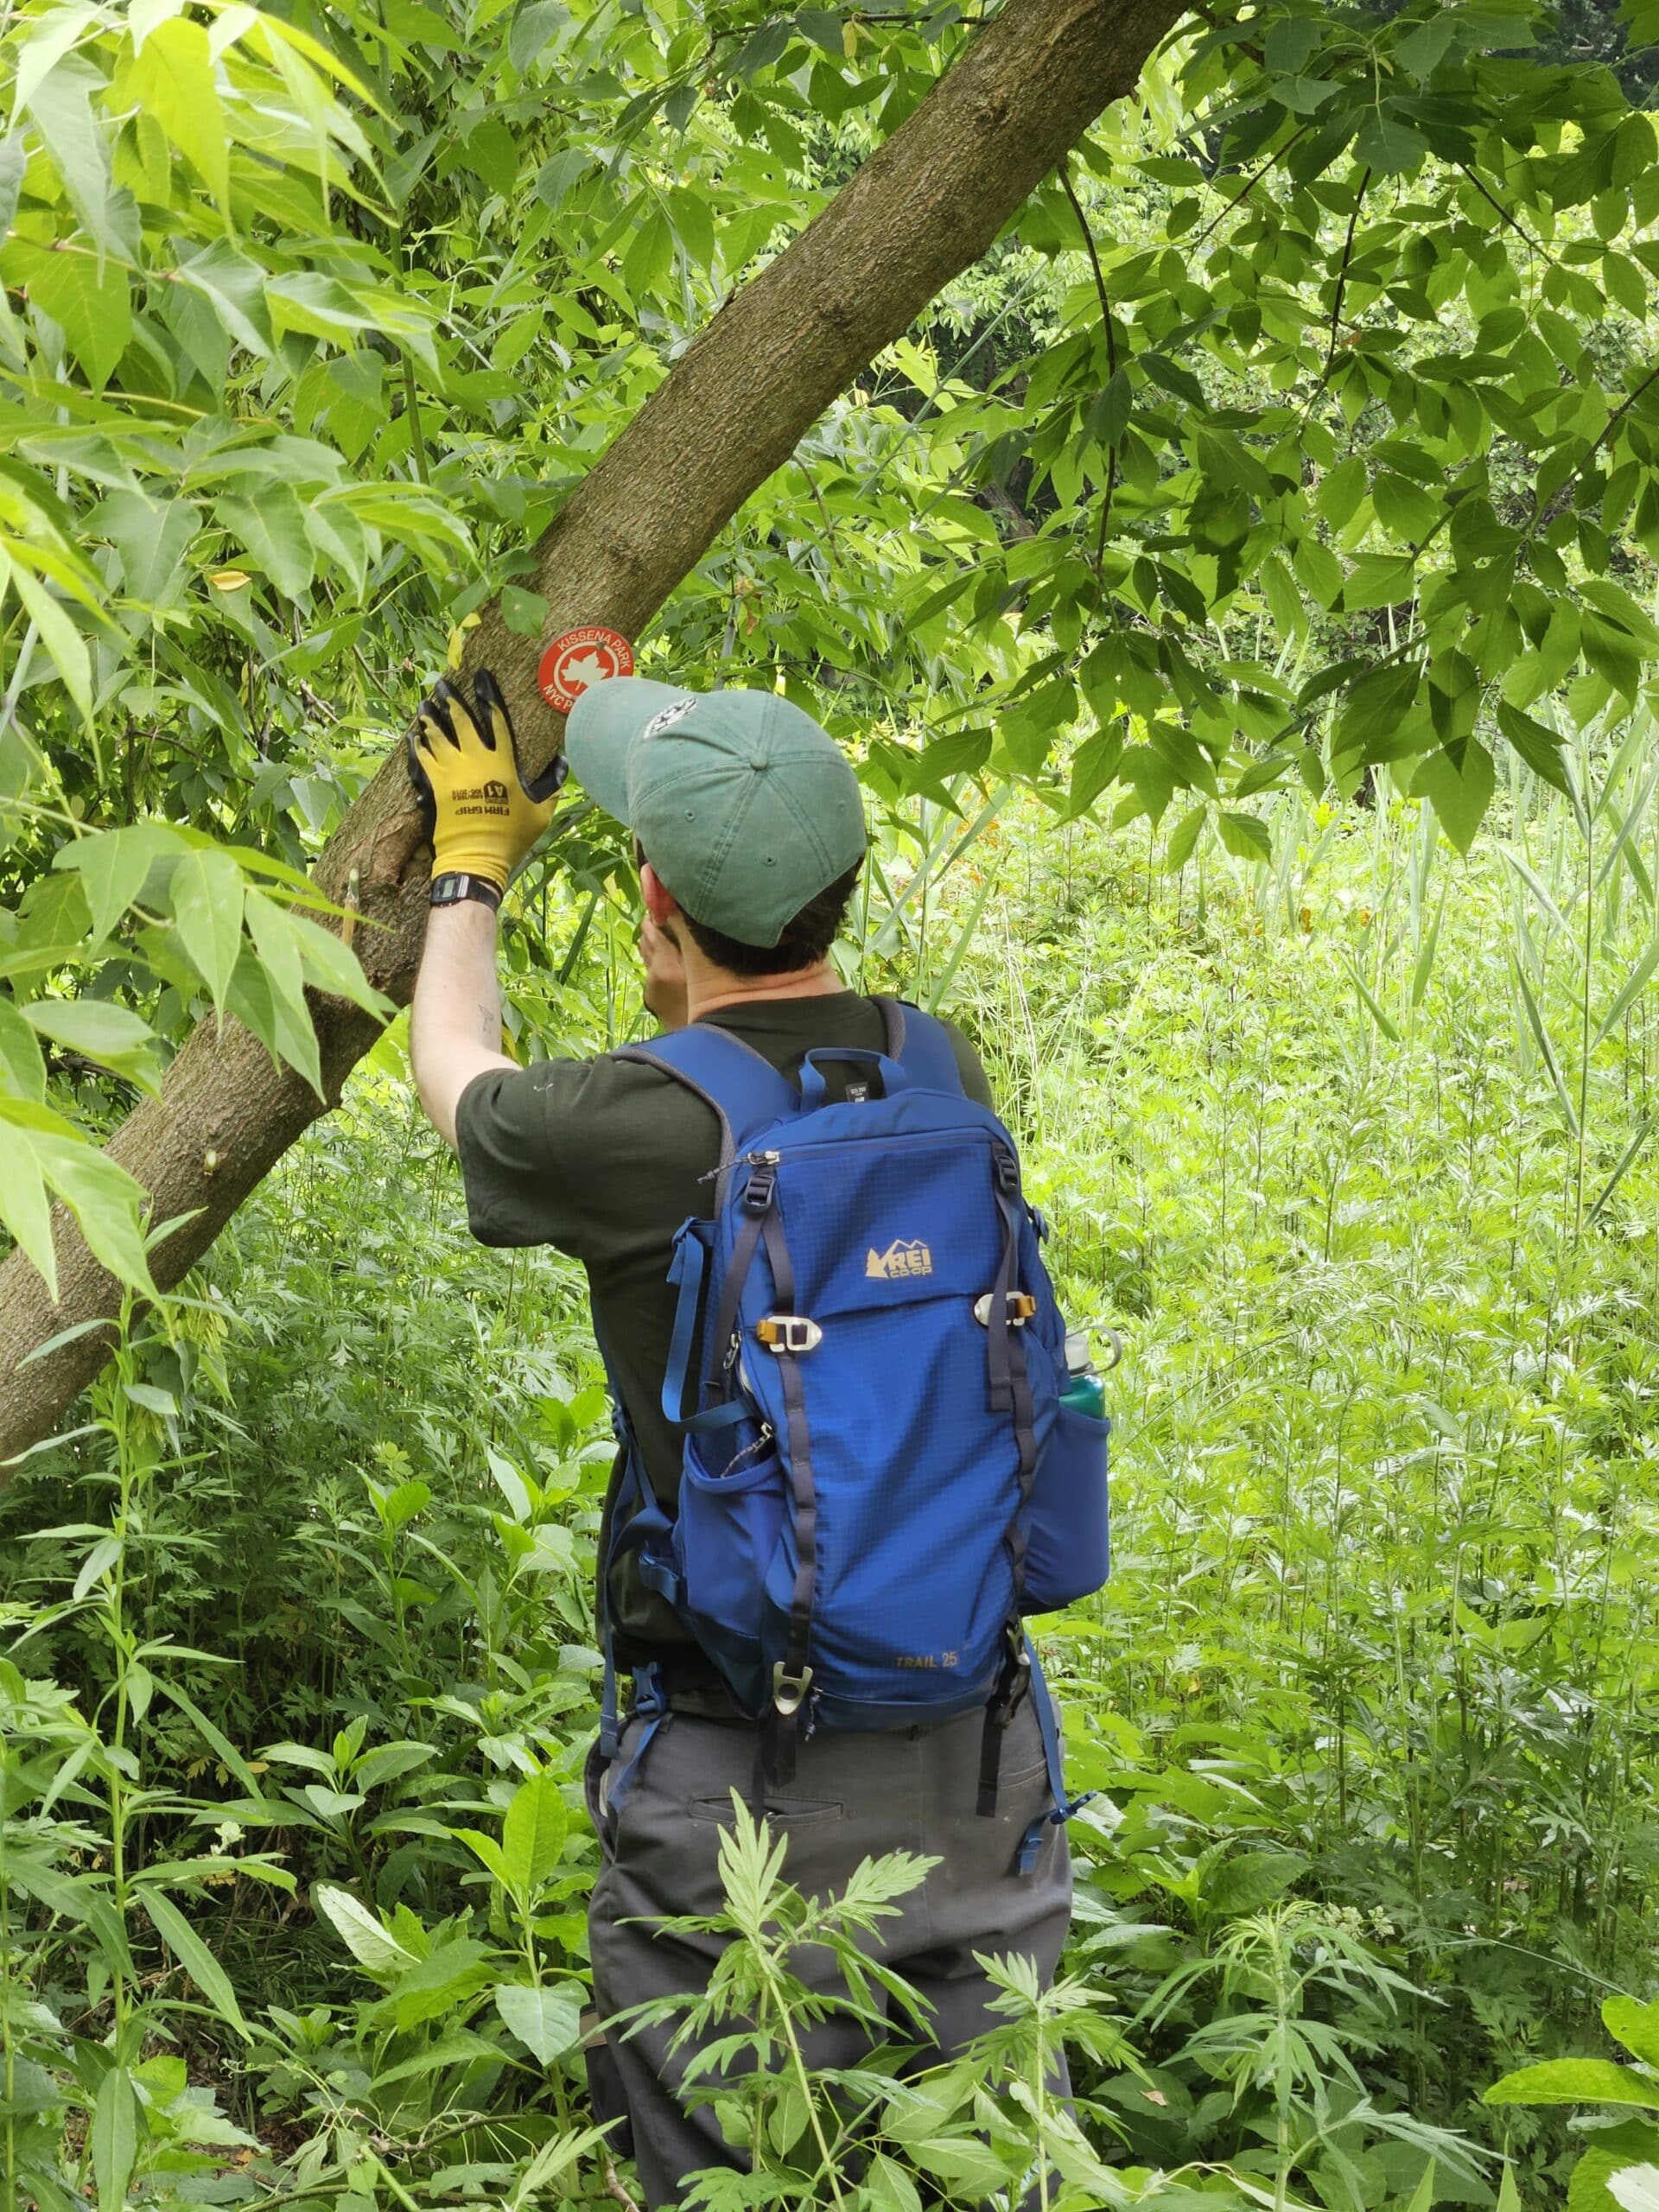 A person hammers a trail marker into a tree wearing a blue back pack